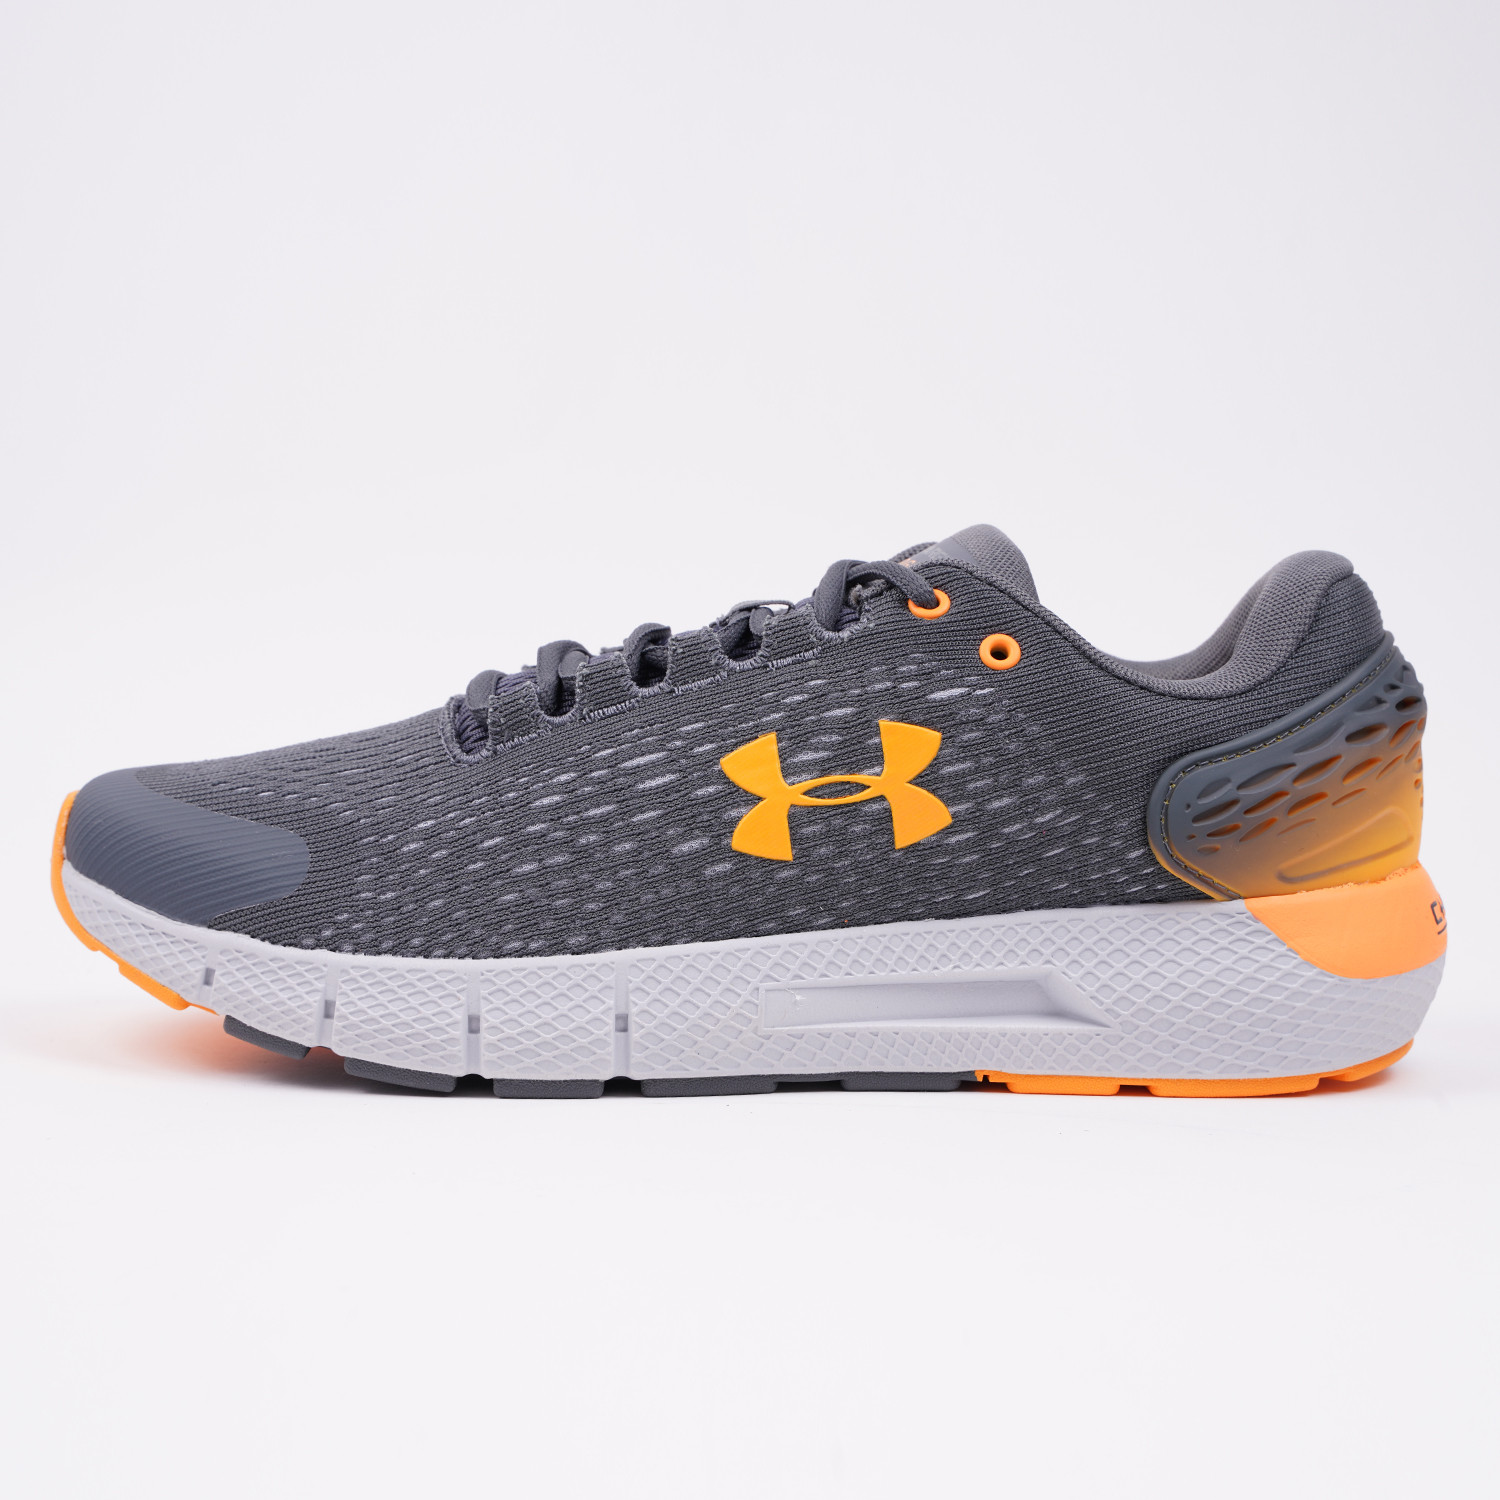 under armour rogue